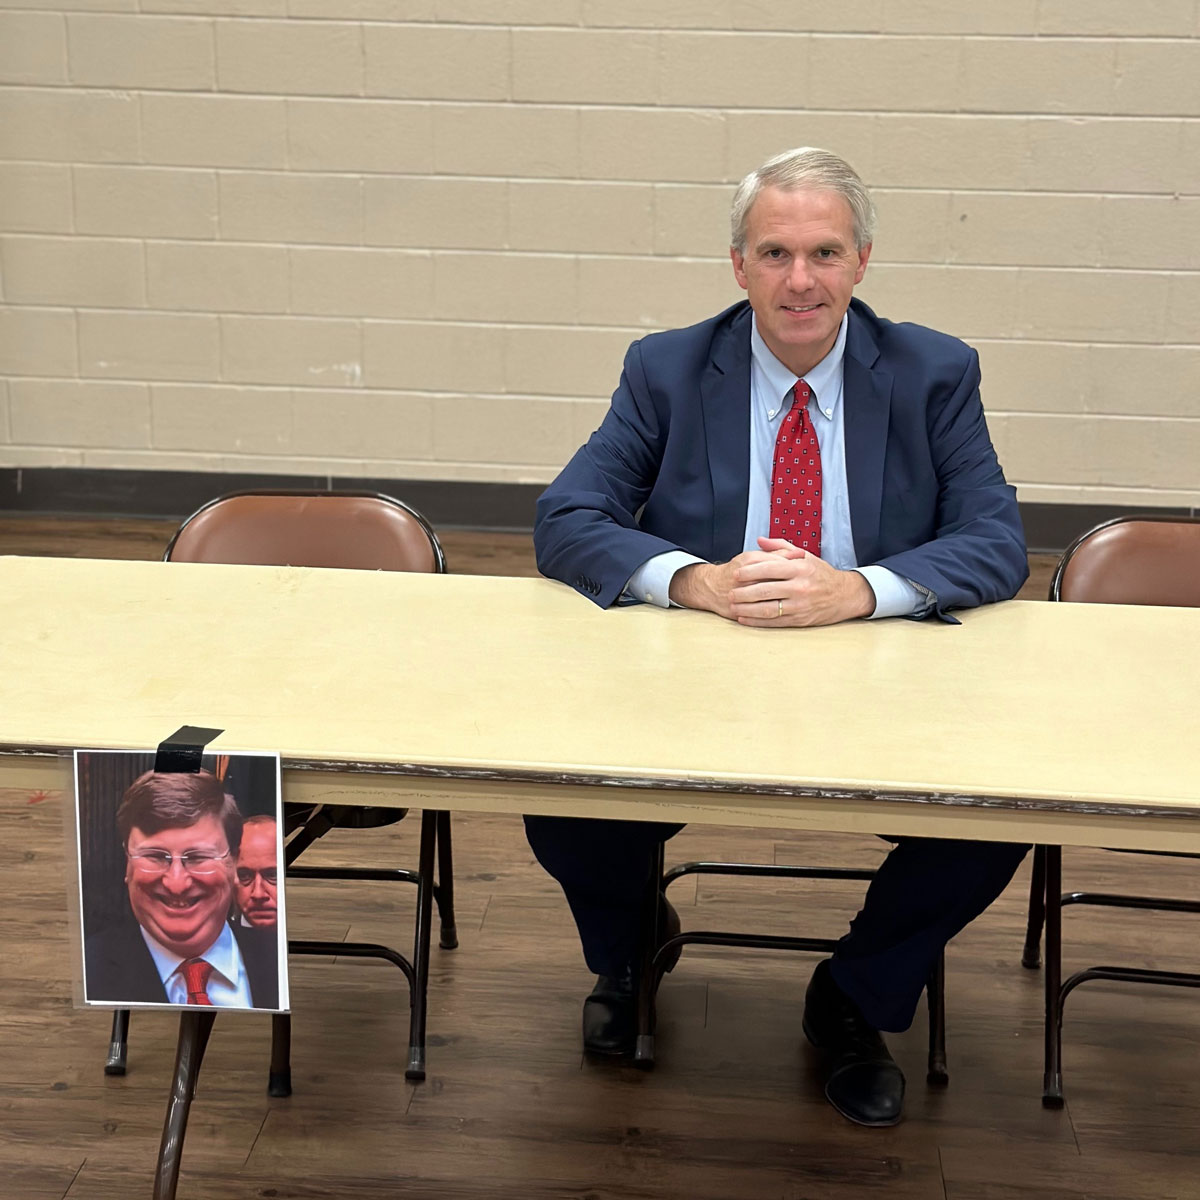 Brandon Presley sits at an empty table with a photo of Tate Reeves taped to the front